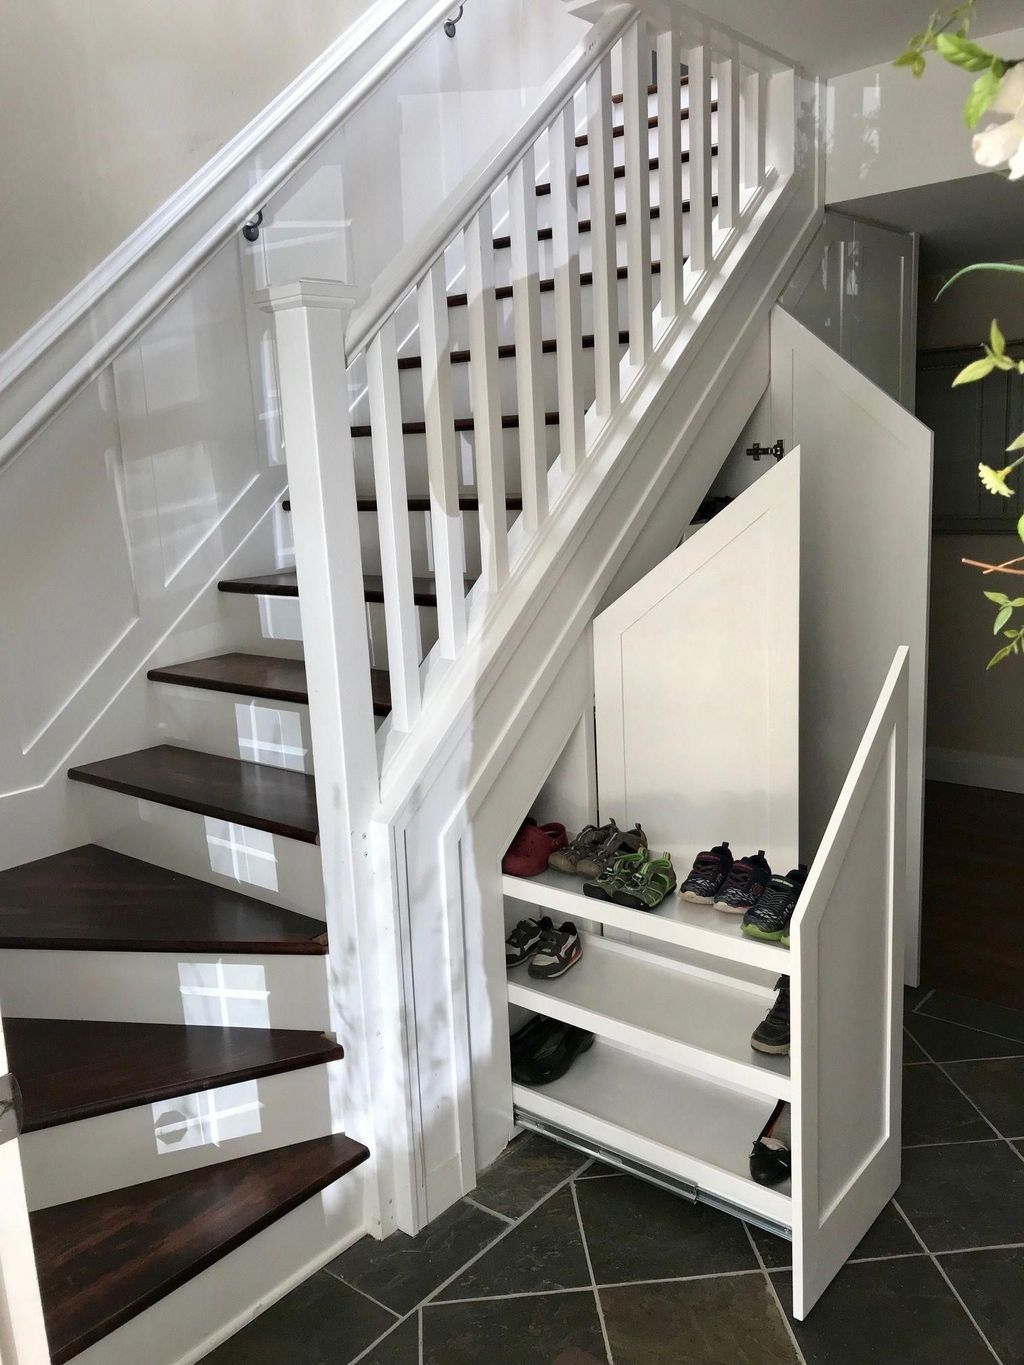 Brilliant Storage Ideas For Under Stairs To Try Asap 07